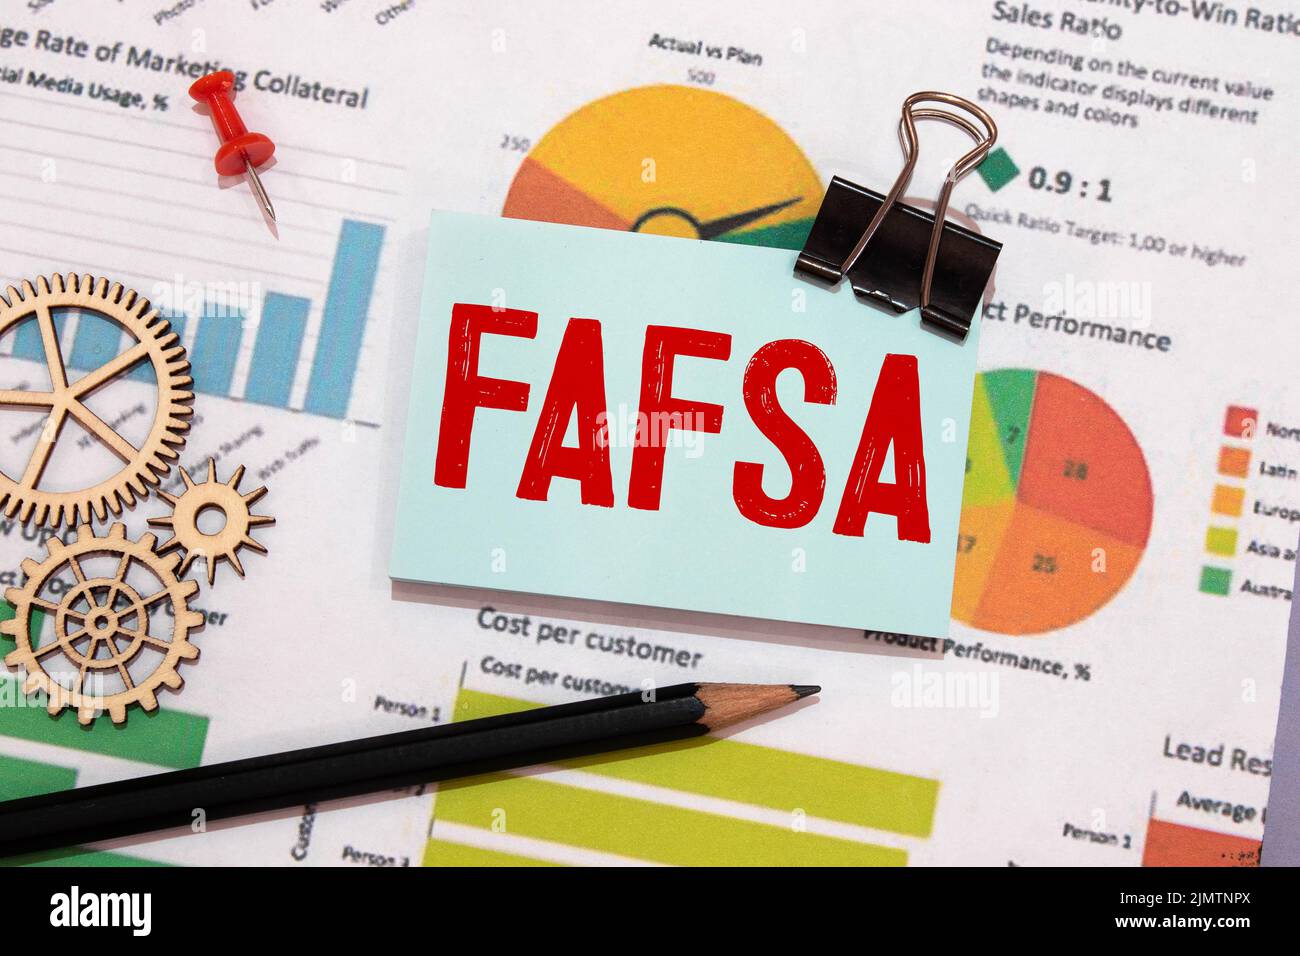 The word Fafsa in a notebook on white table with office tools. Business concept Stock Photo